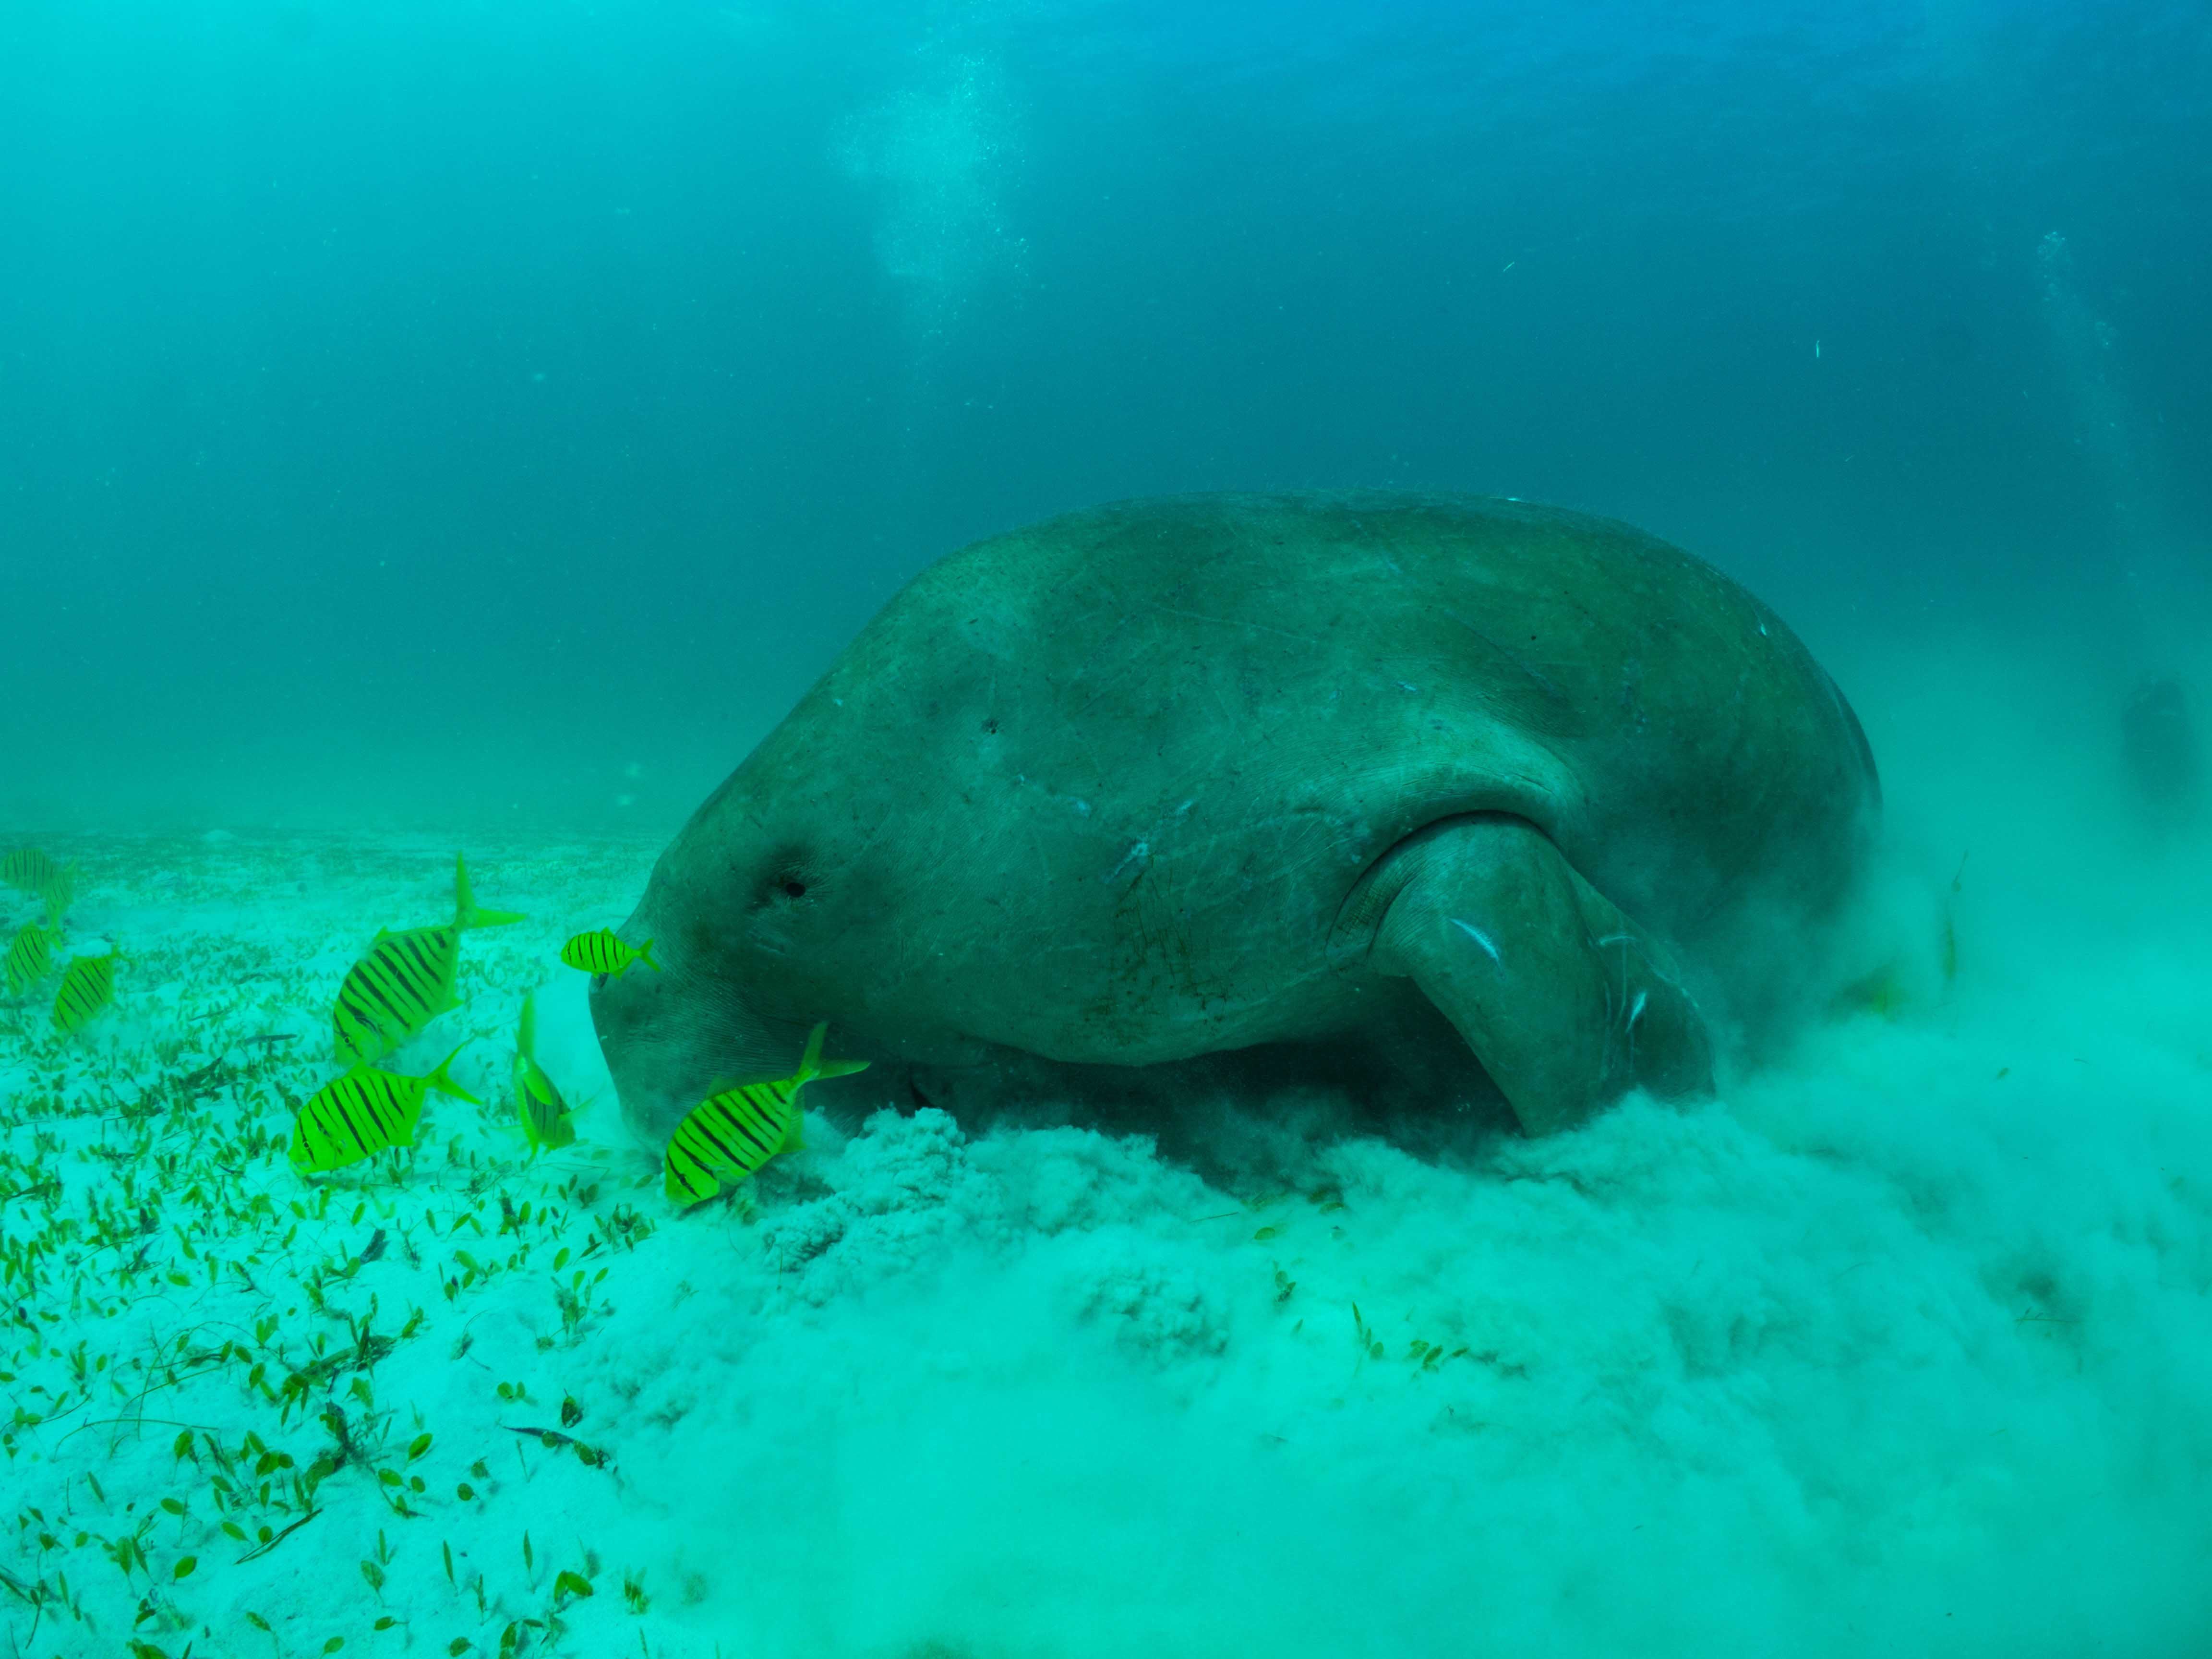 FRIENDLIEST DUGONG. Aban is said to be the largest and friendliest of the dugongs in Northern Palawan. He is identified through his distinctive scars. Photo by Danny Ocampo
   